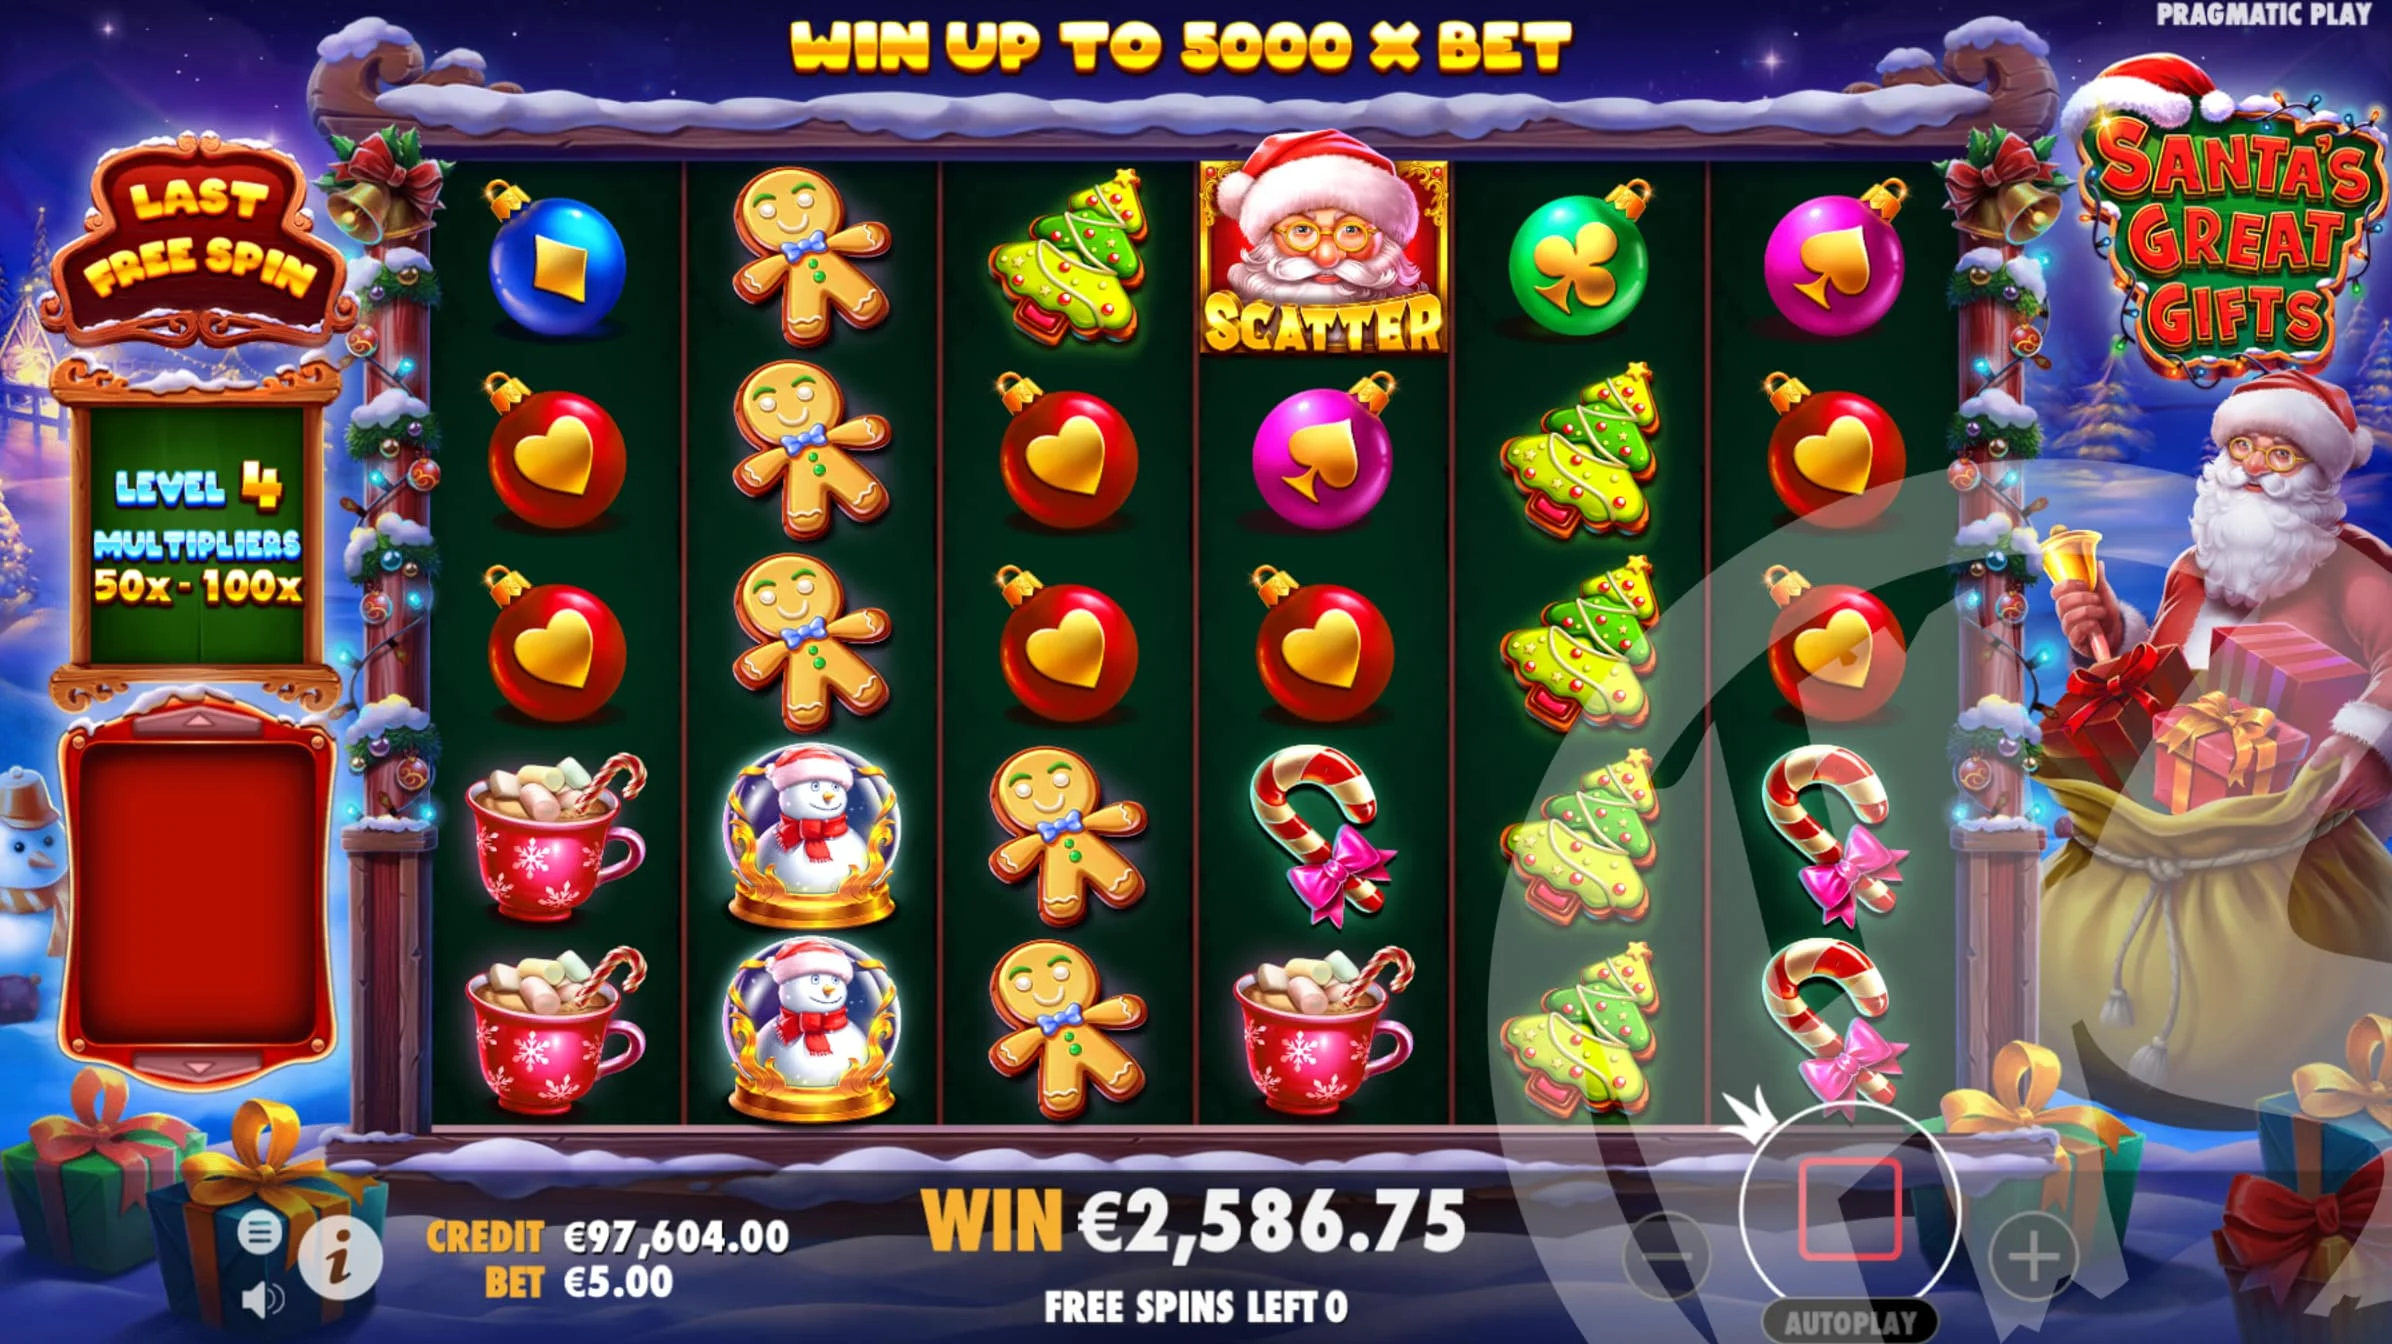 Santa's Great Gifts Free Spins Level 4